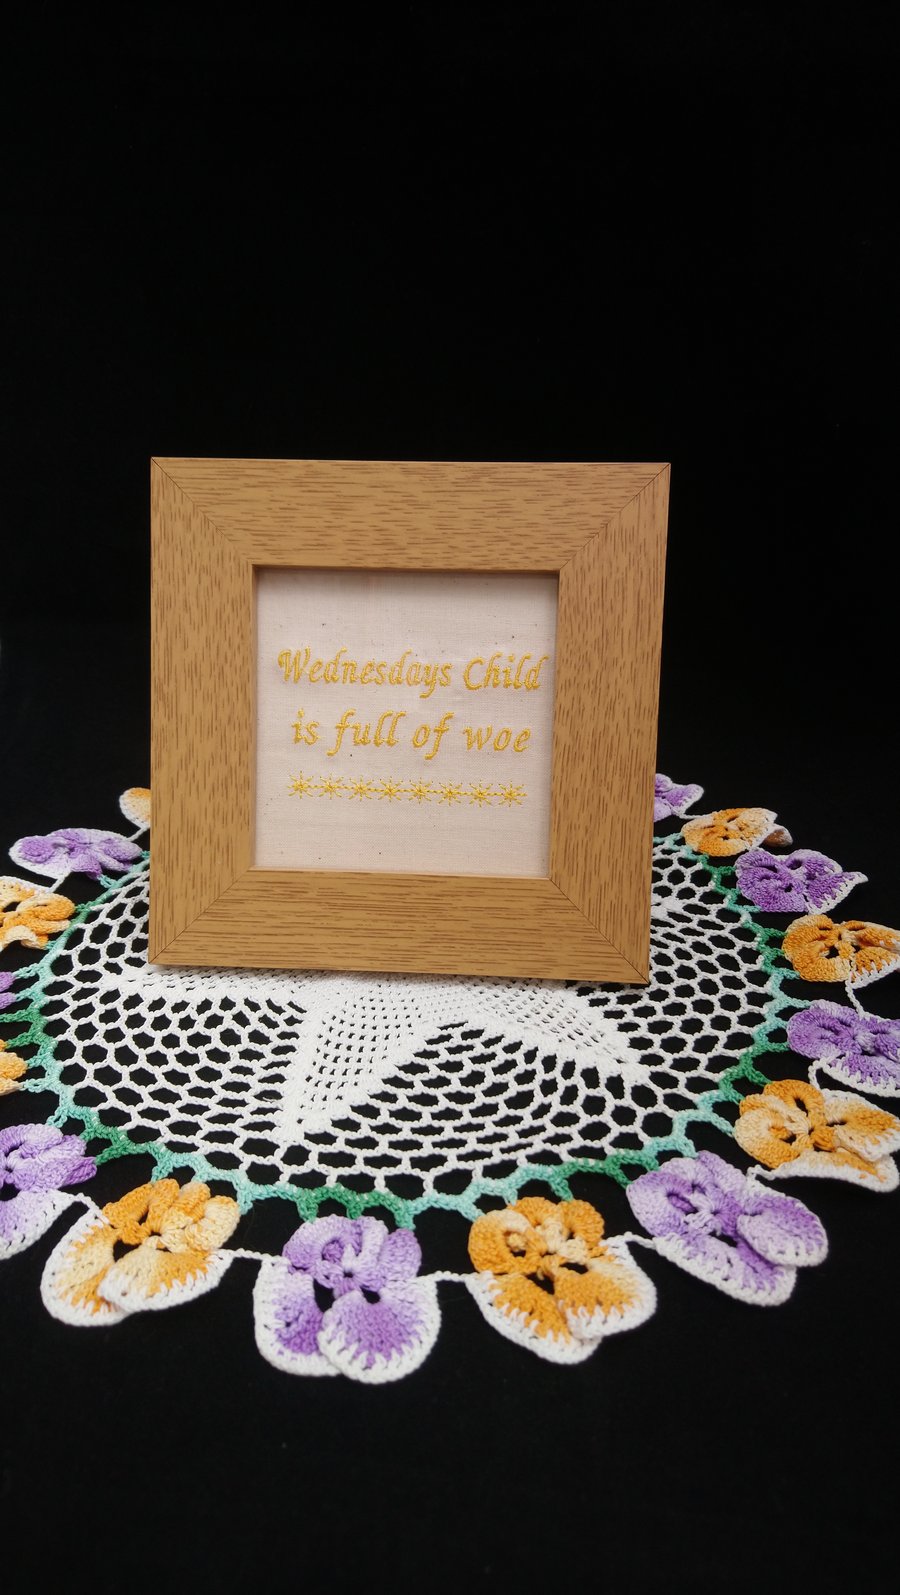 Nursery Rhyme Wednesdays Child Embroidery in a Frame